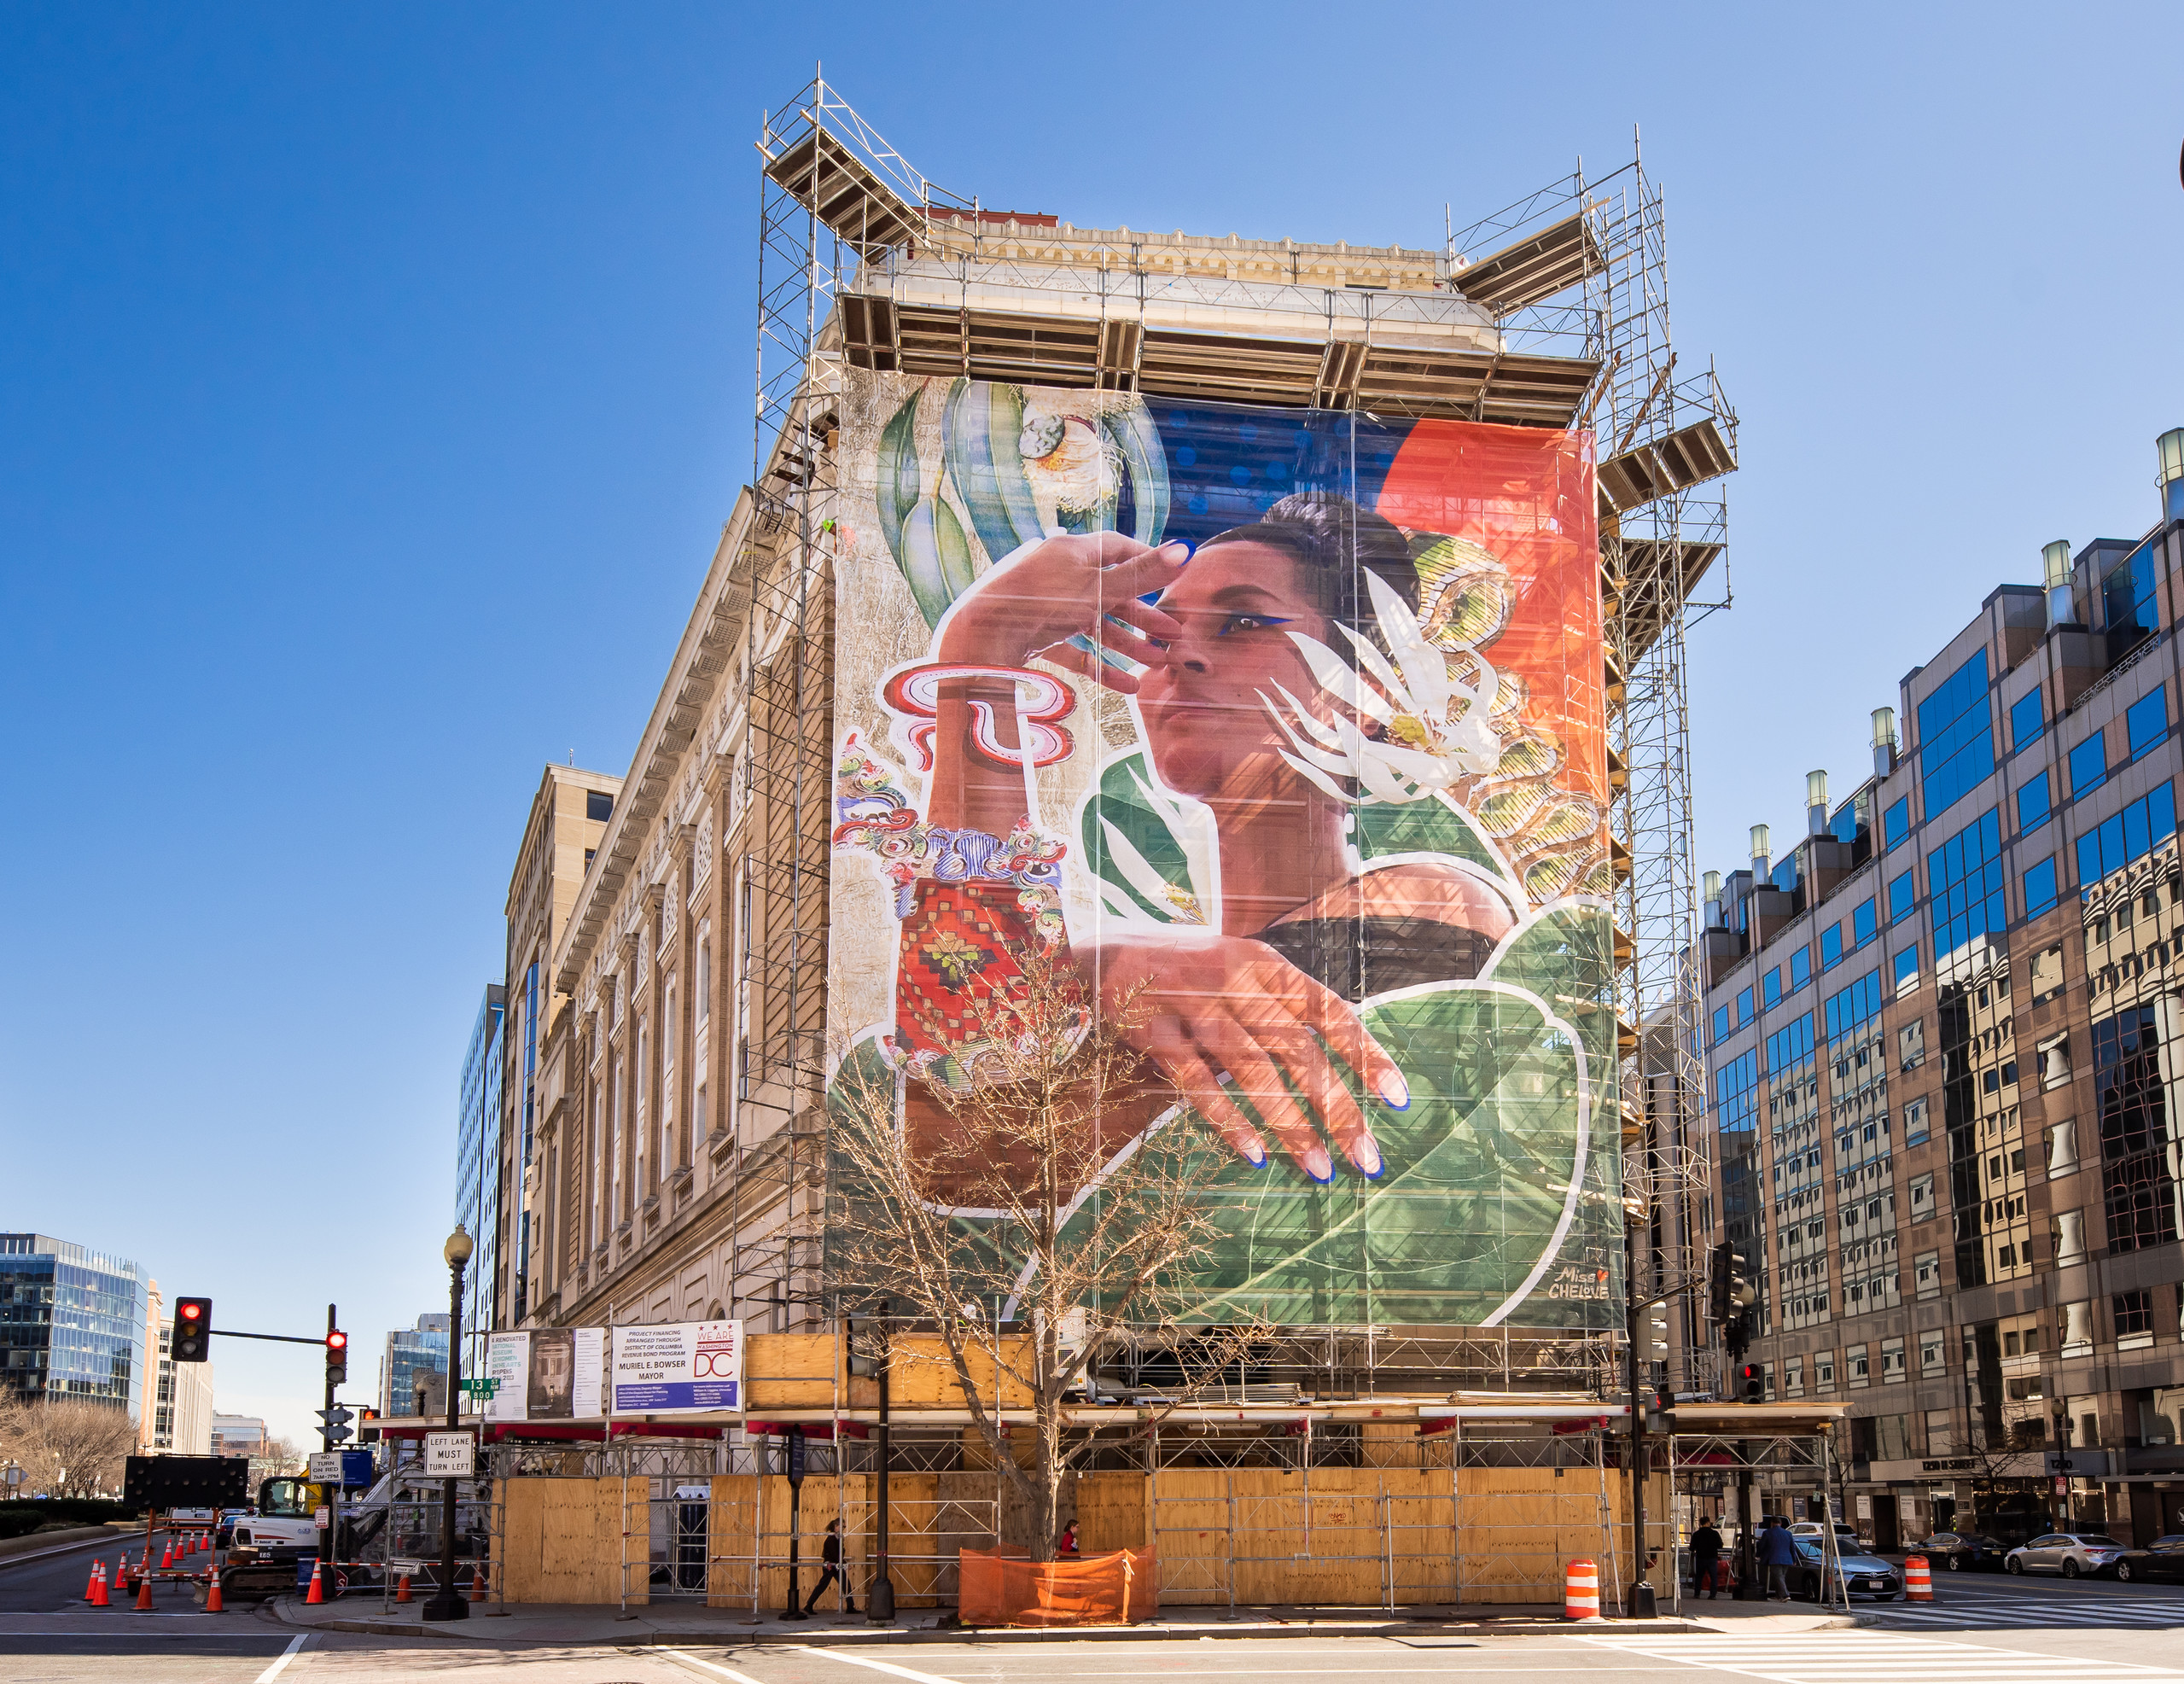 Exterior view of the museum with scoffolding all around that features a large, colorful mural on the front depicting a dark-skinned woman gazing into the distance with her arm touching her face. The background features flowers and green leaves.